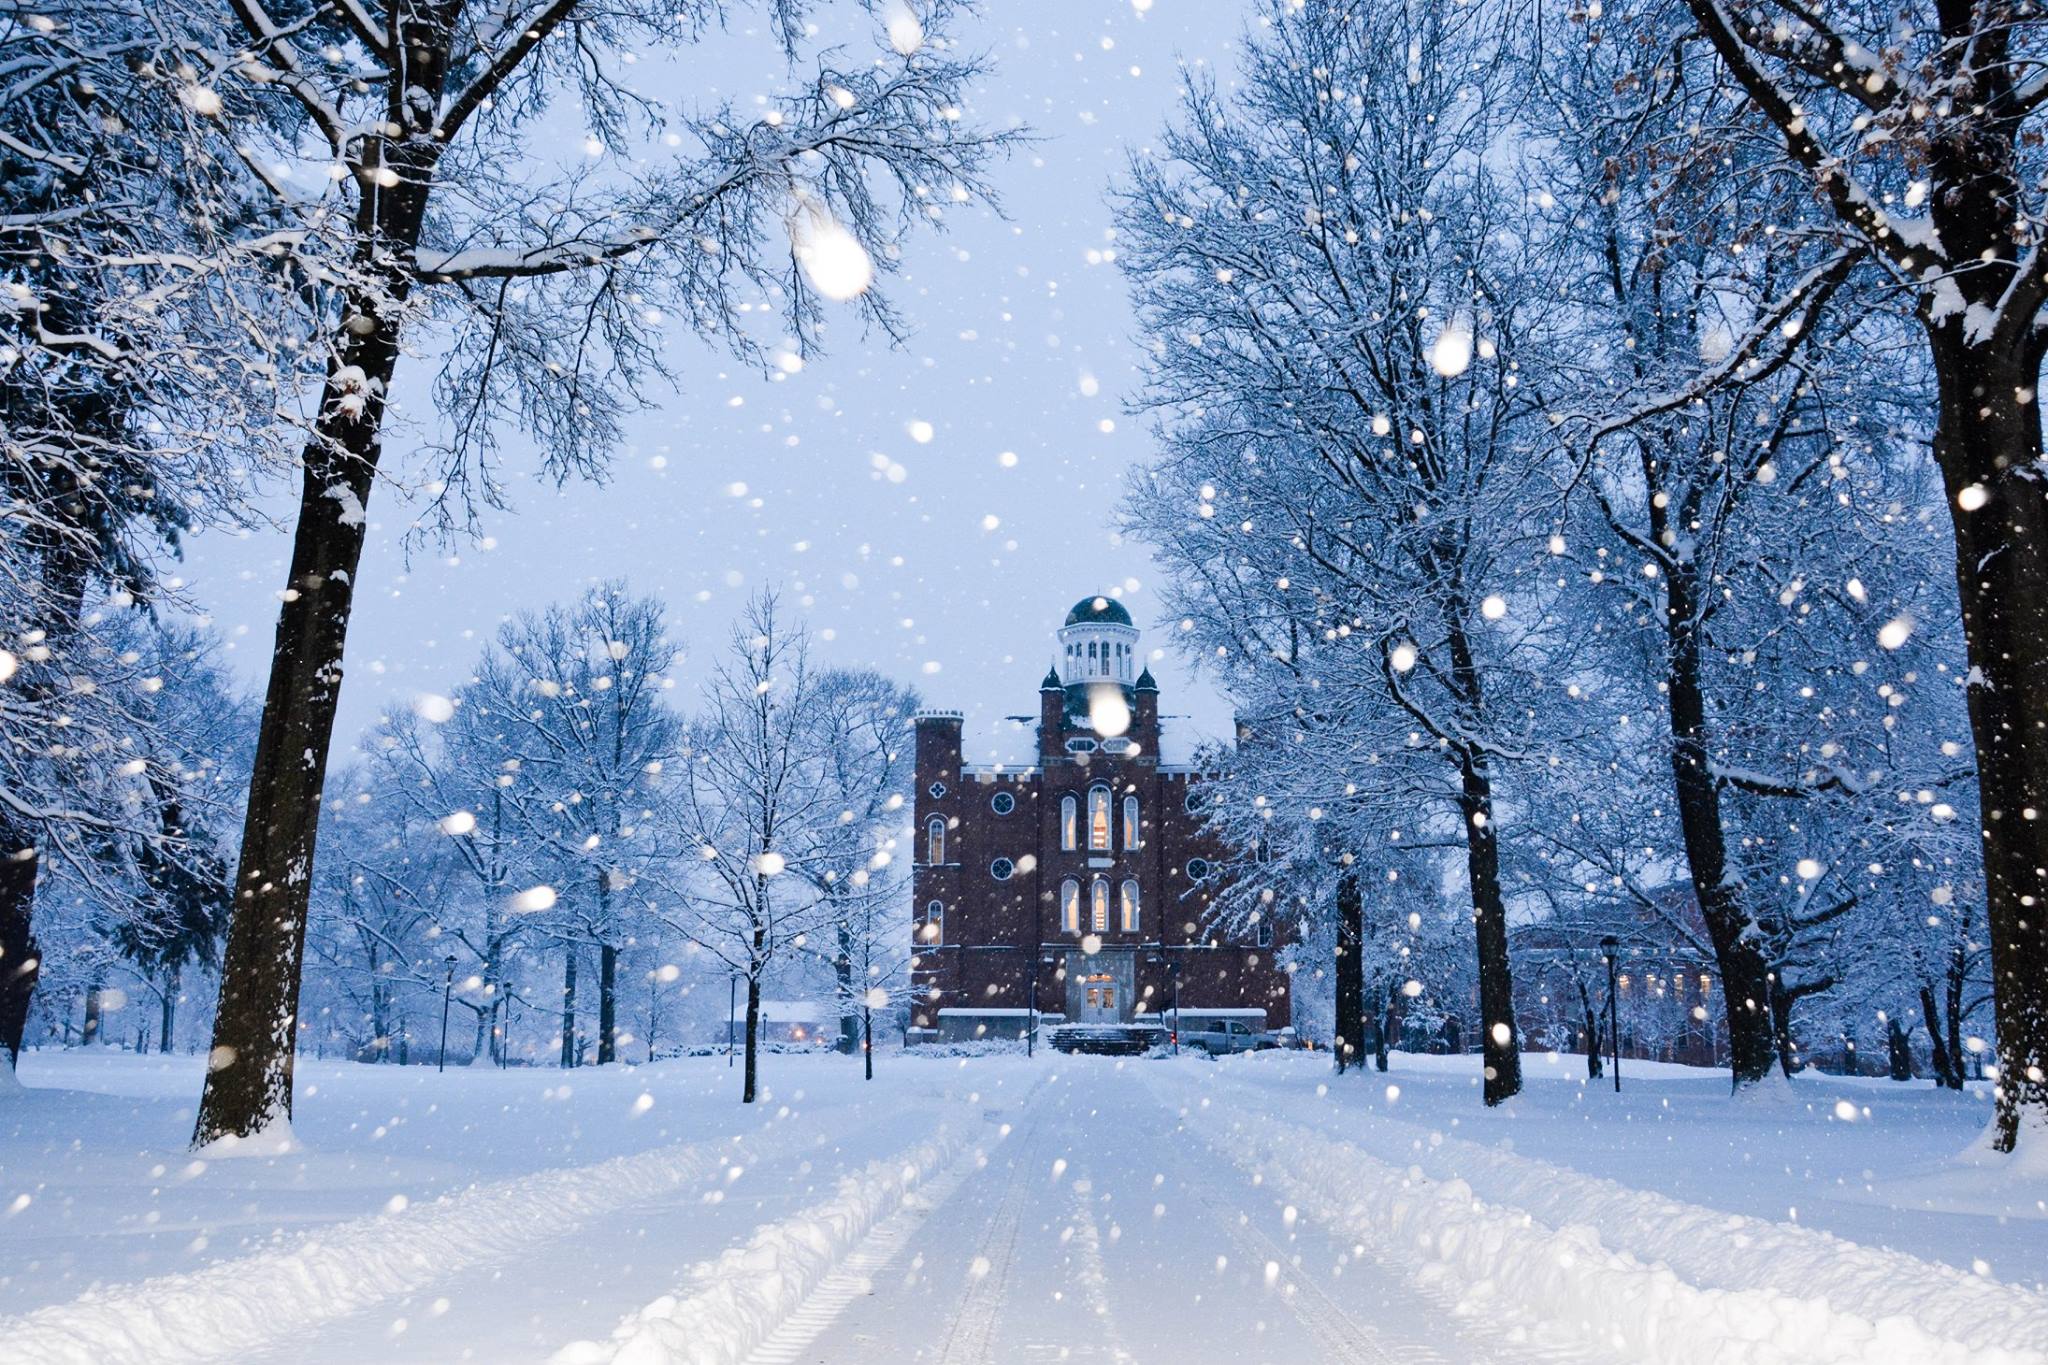 chapman hall in winter with snow in foreground